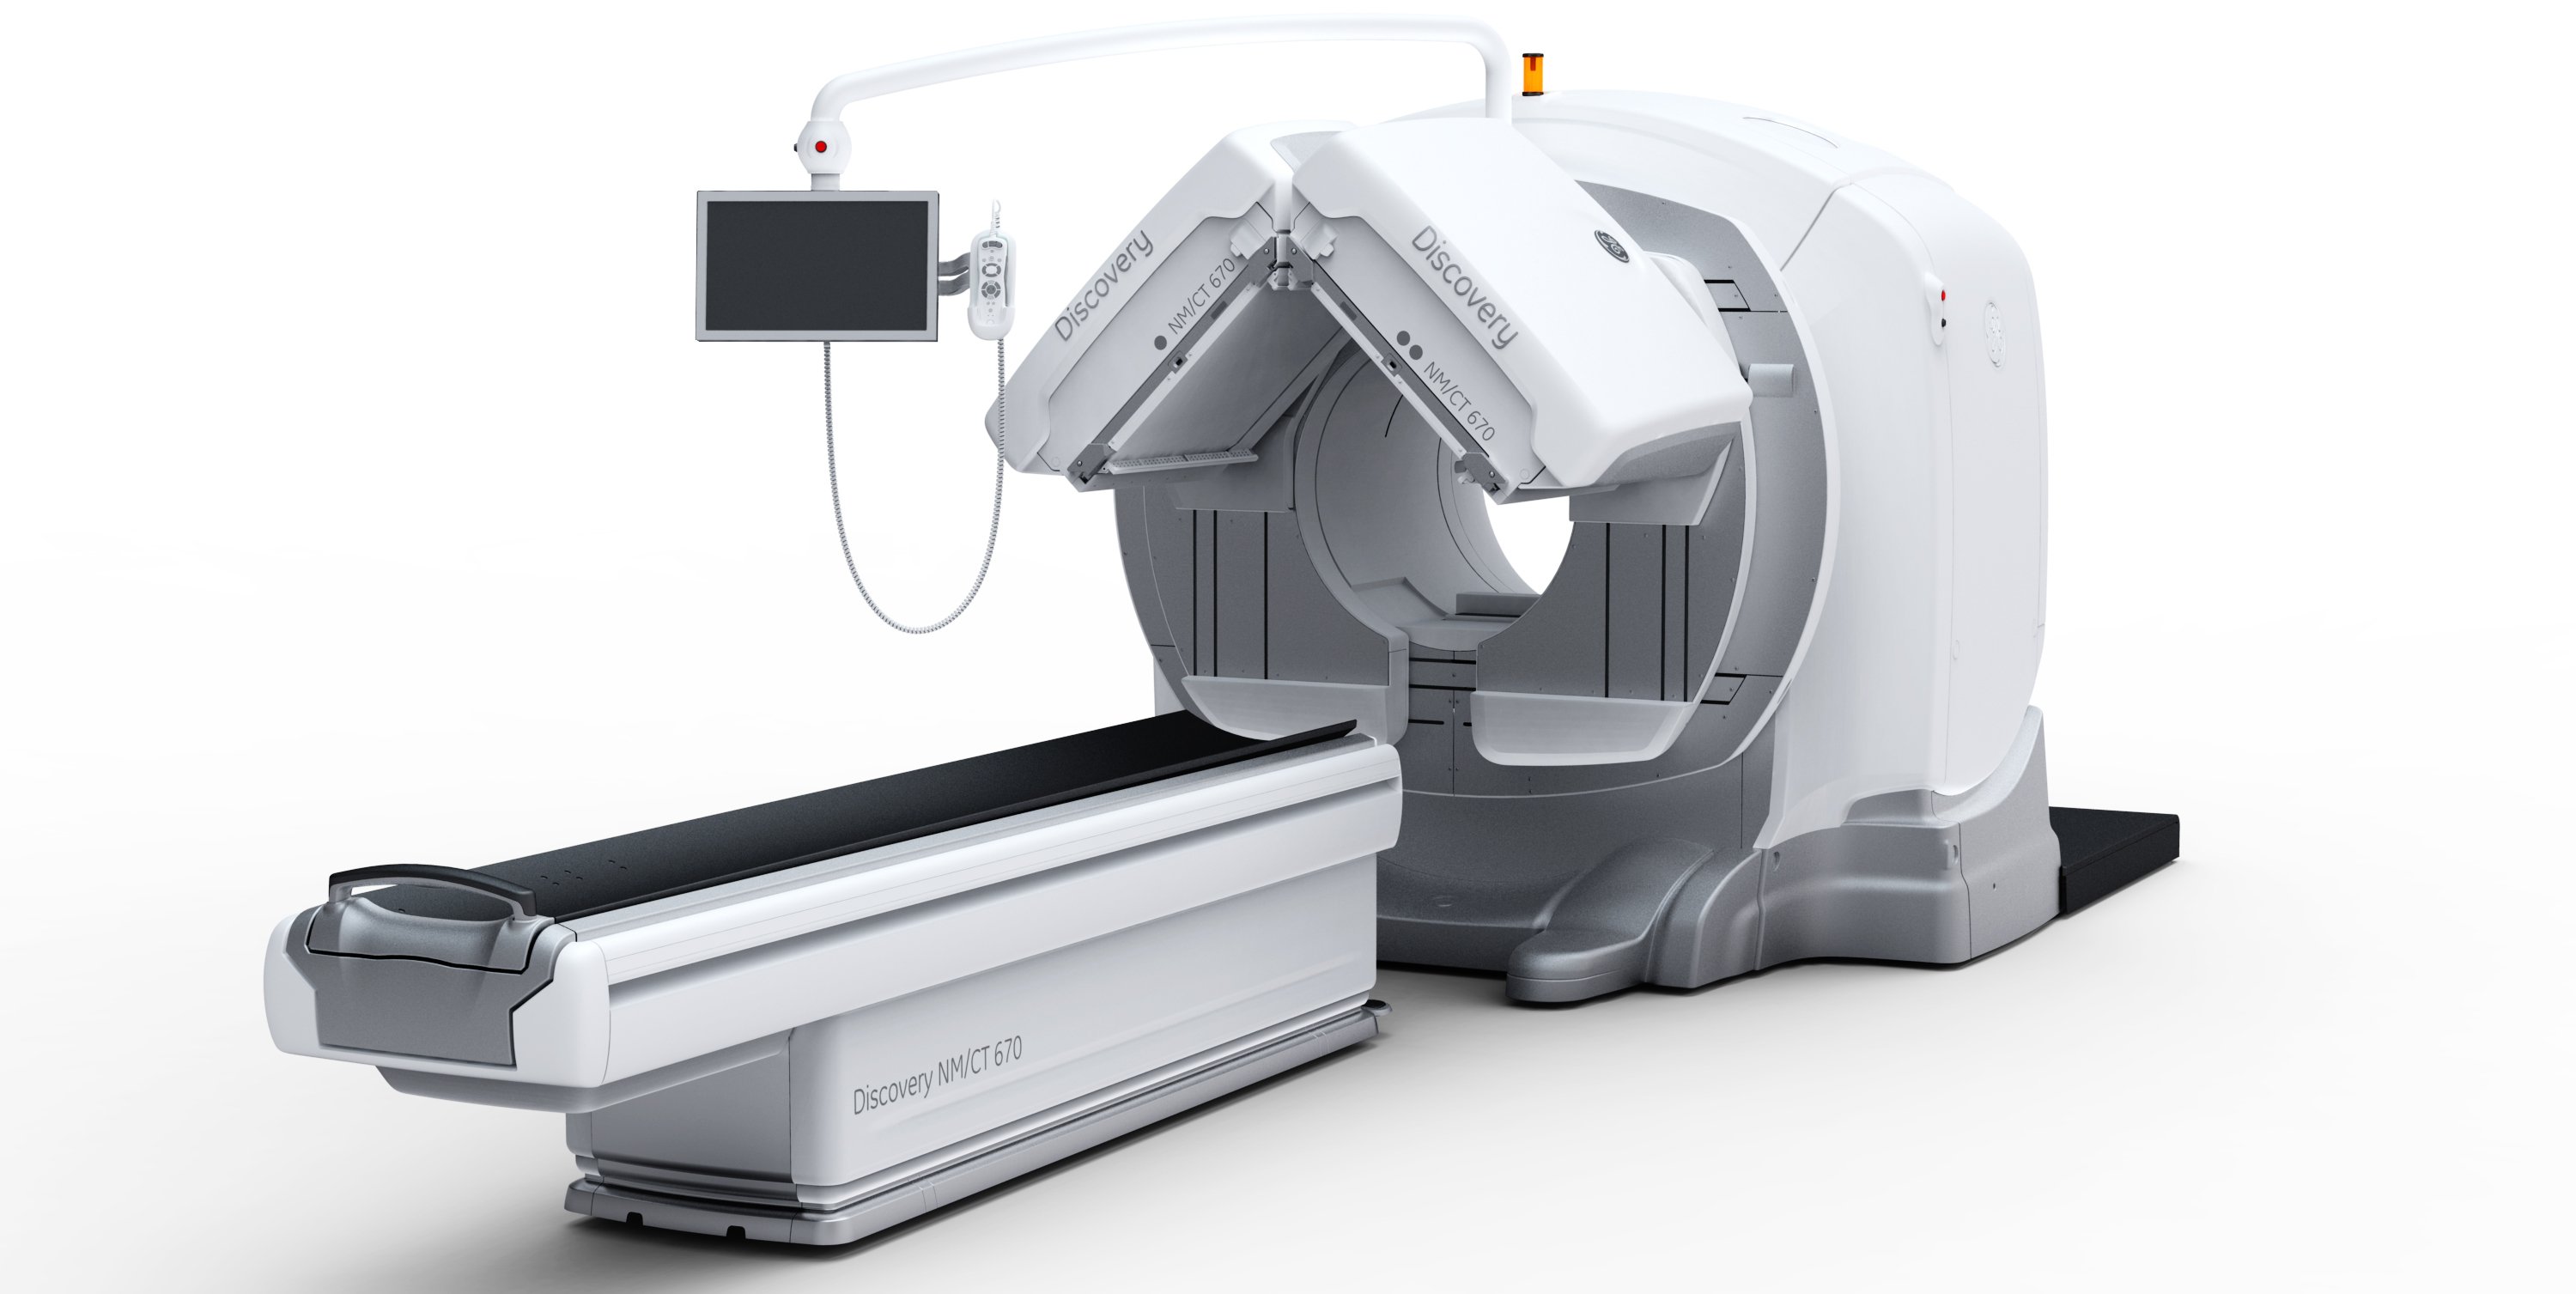 Familielid lucht Ontkennen Patient Killed During Nuclear Imaging Scan | Imaging Technology News